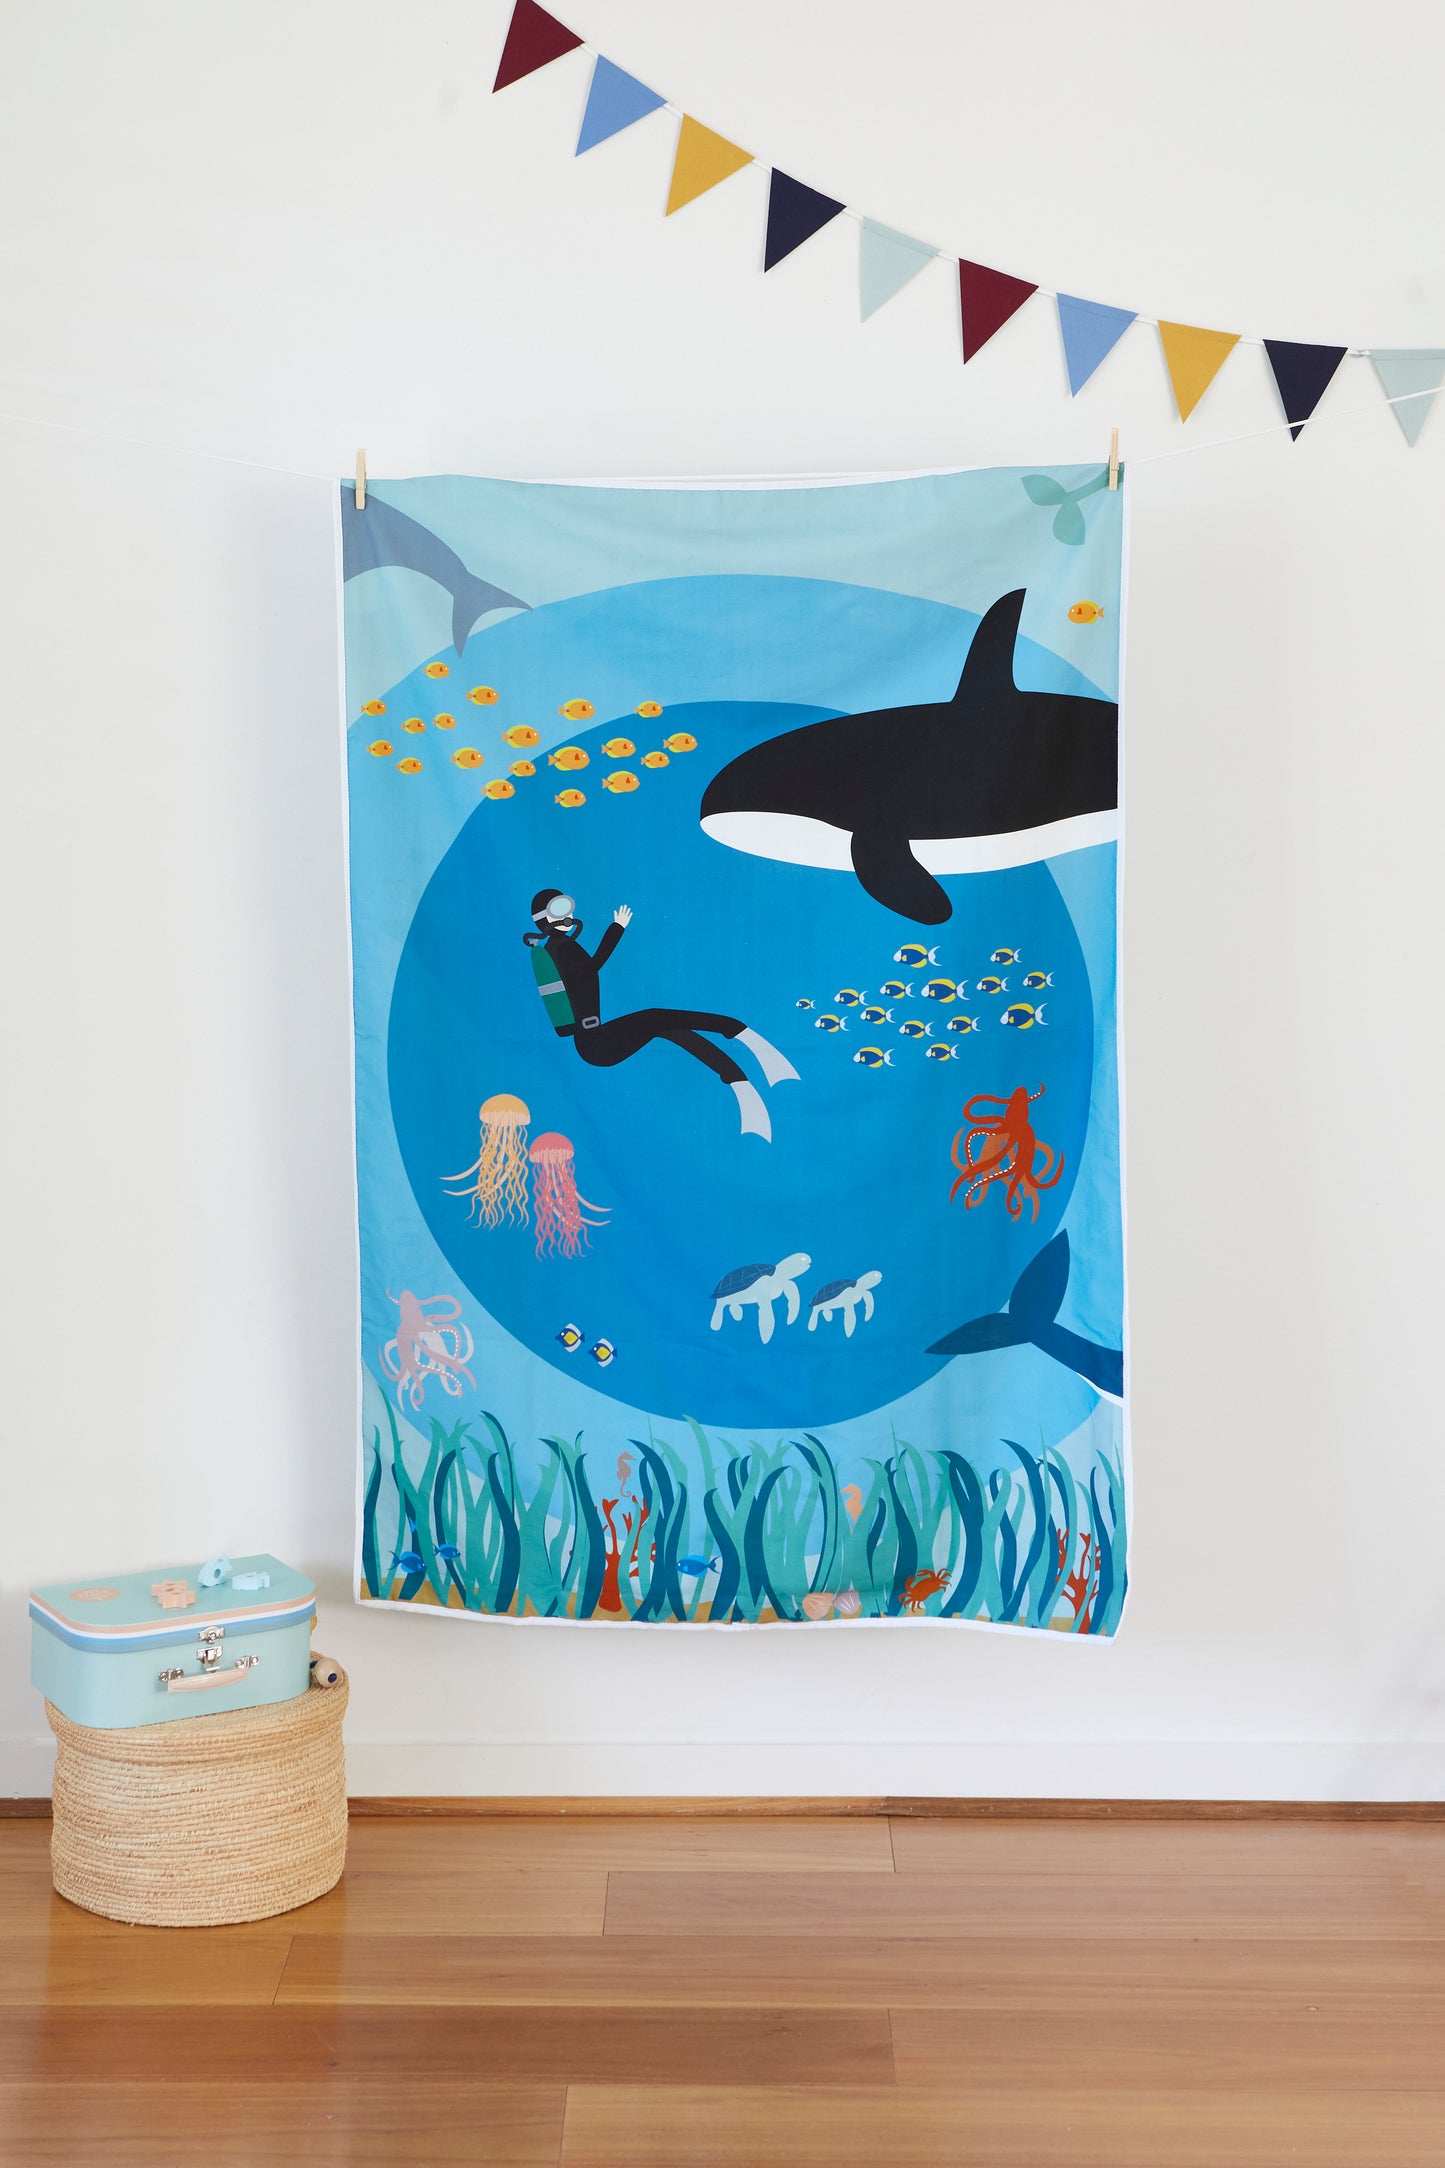 Ocean lover playmat 100%cotton with carry strap, washable, lightweight, natural materials, support your child's play and imagination. Size: 1mx1.4m;  